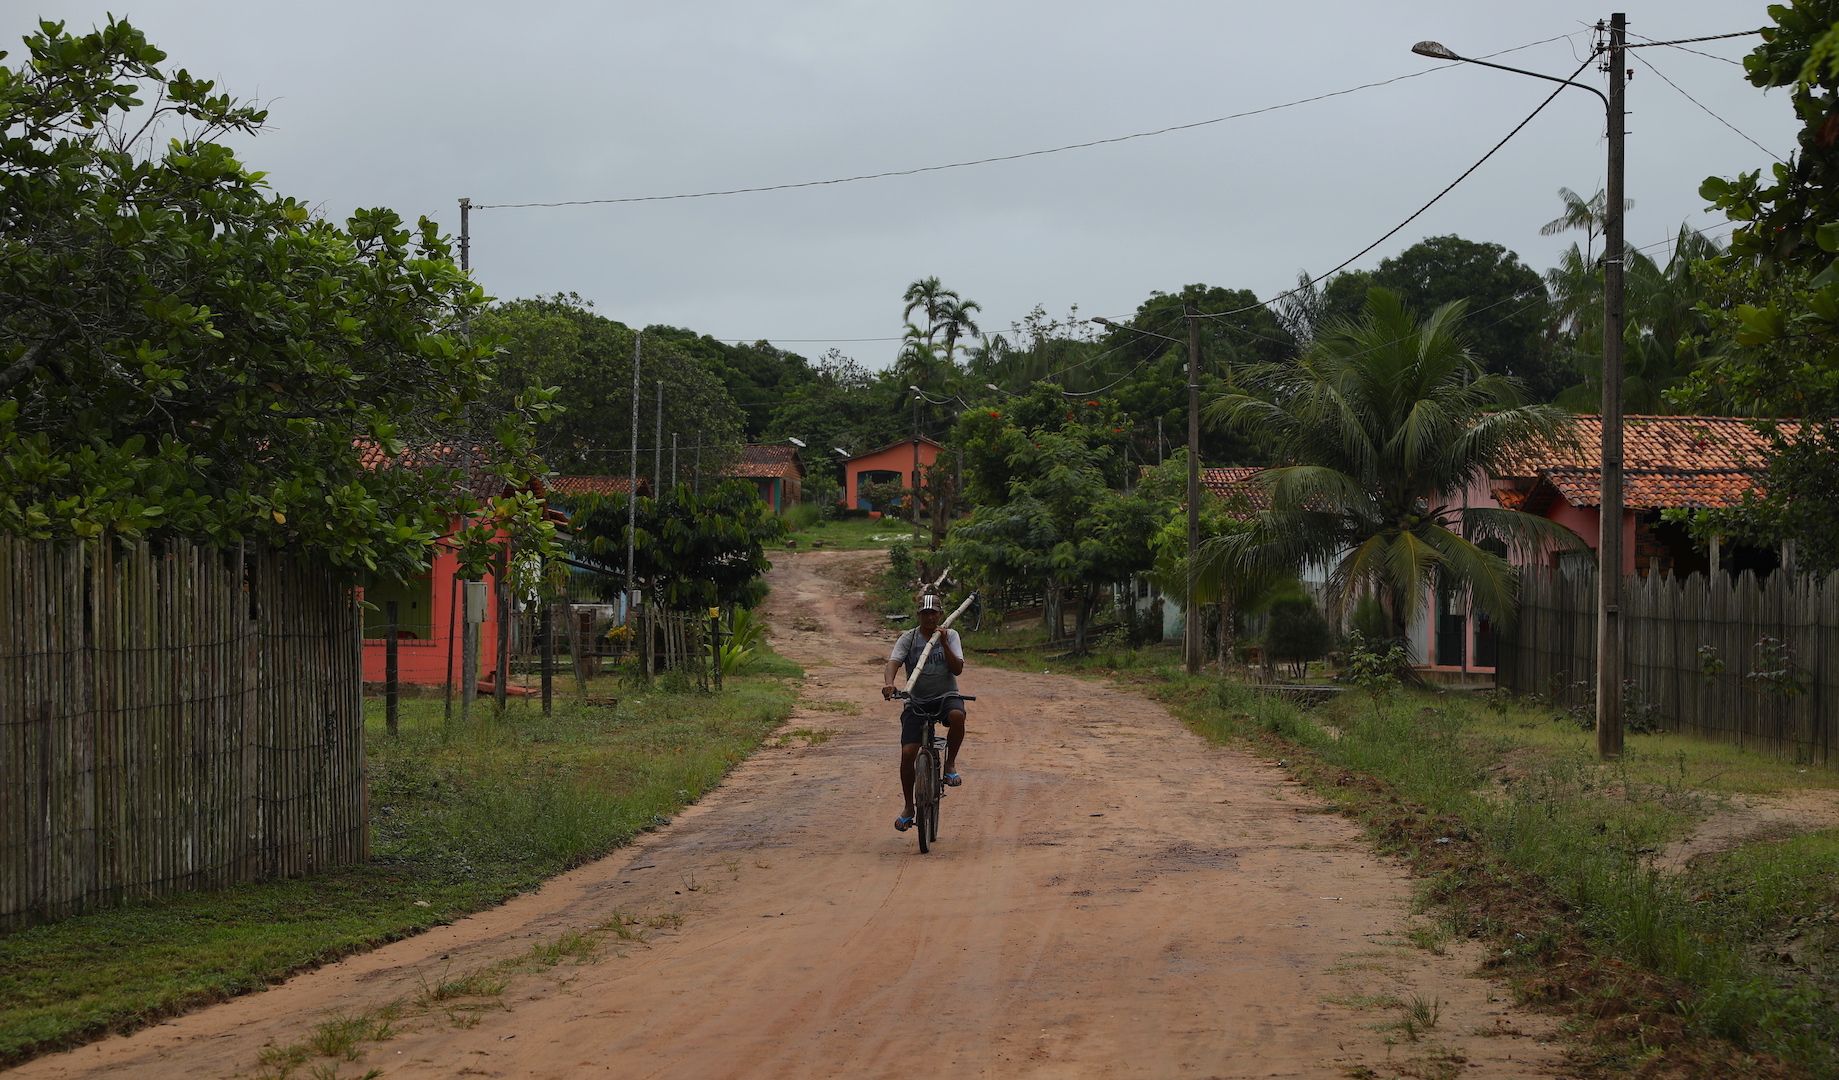 One of Prata’s residents bicycles down one of the several dirt paths connected to the only paved road in the village. Image by Anton L. Delgado. Brazil, 2020.